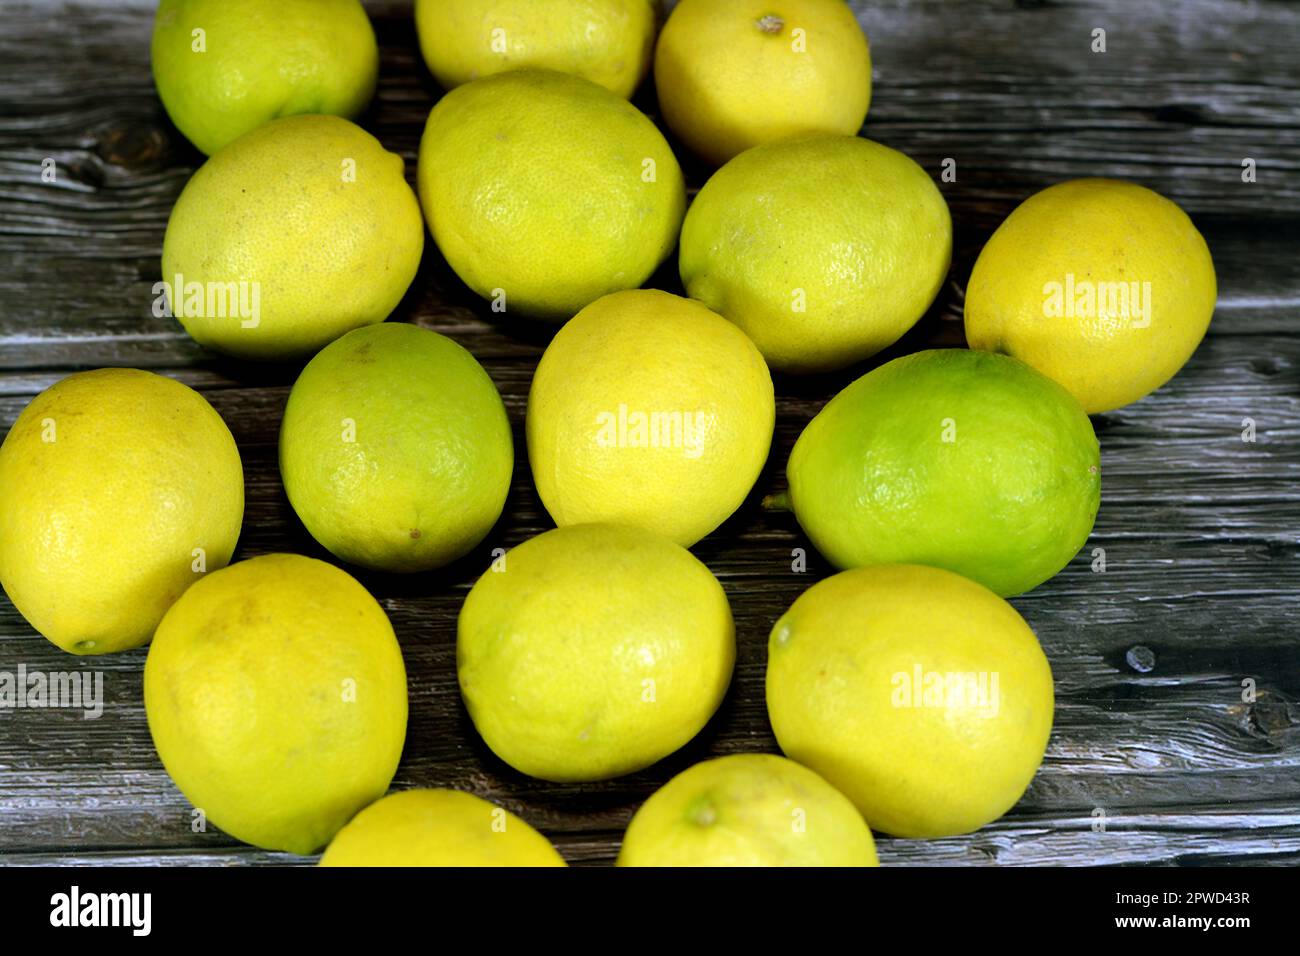 Pile of fresh lemons, The lemon (Citrus limon) is a species of small evergreen trees in the flowering plant family Rutaceae, native to Asia, used in r Stock Photo